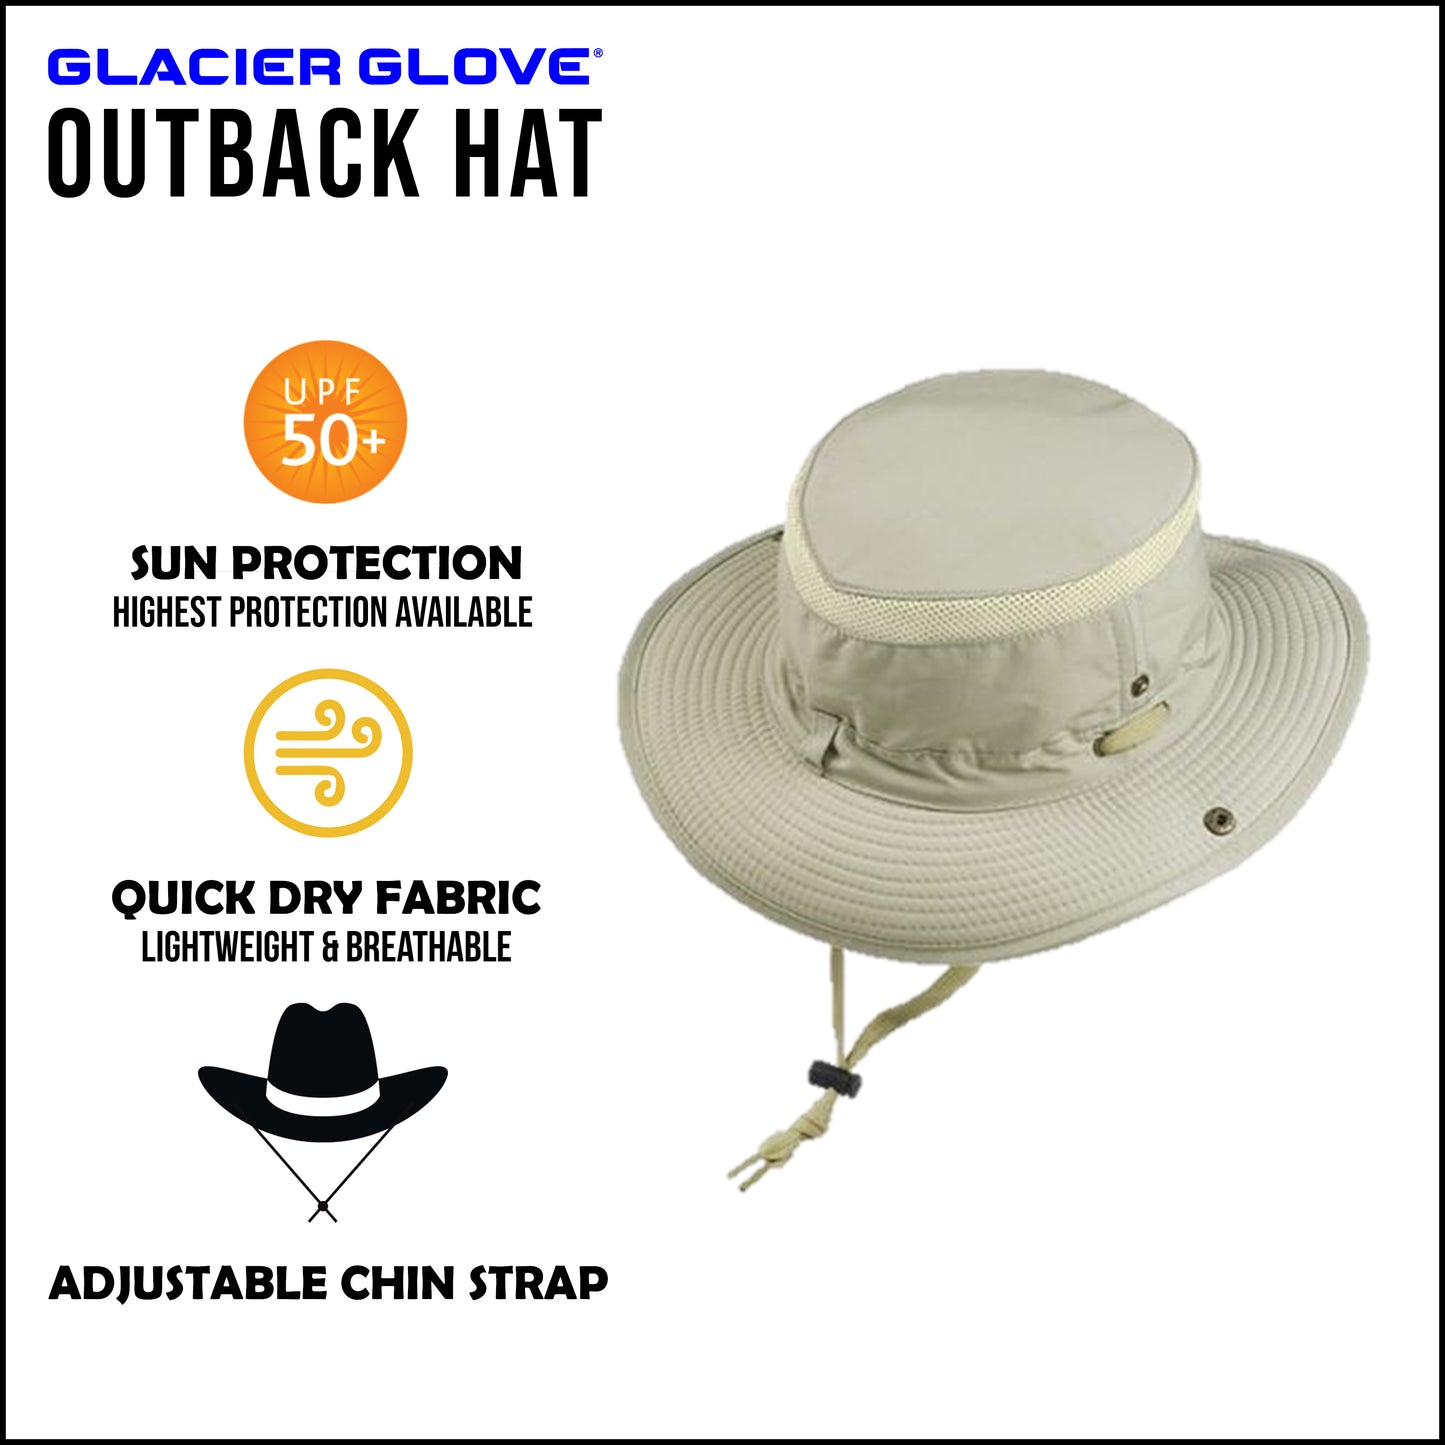 A popular choice for outdoor activities, the Outback Hat is designed with a full brim and is rated at the maximum protection of UPF 50+. Providing extra protection from the elements, this hat is designed to keep you outdoors longer.